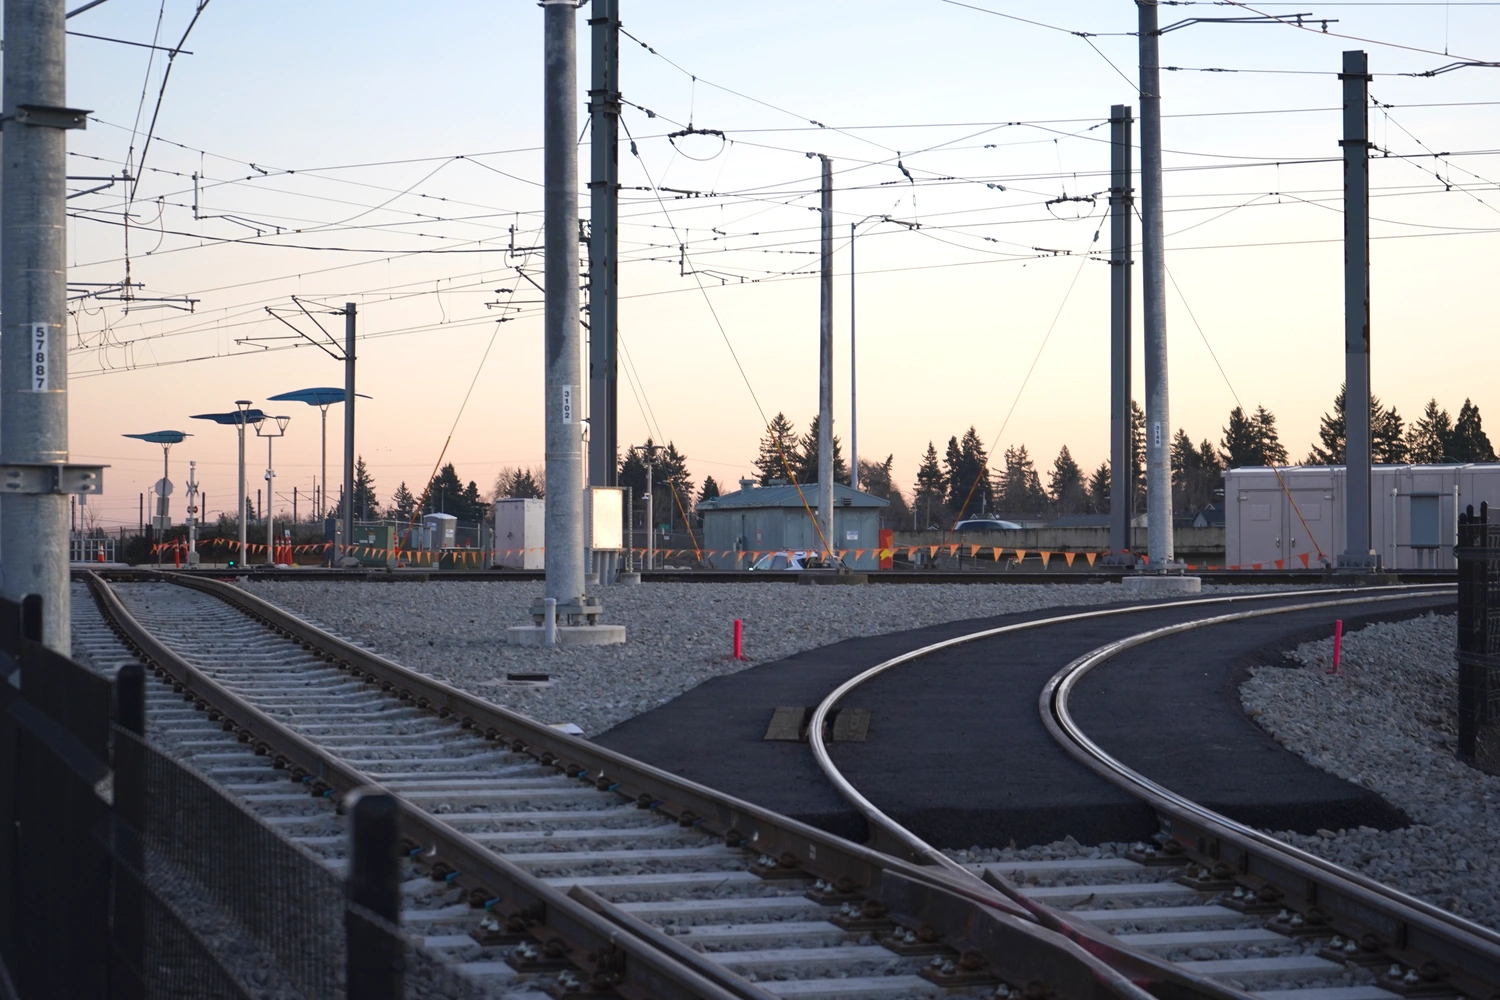 Two tracks with overhead catenary electrification form part of a
       wye junction; one continues straight away
       from the camera, while another curves right.
       The ballast and ties look new.
       Beyond these tracks lie assorted construction materials, the other tracks
       in the junction, buildings,
       and a platform shelter.